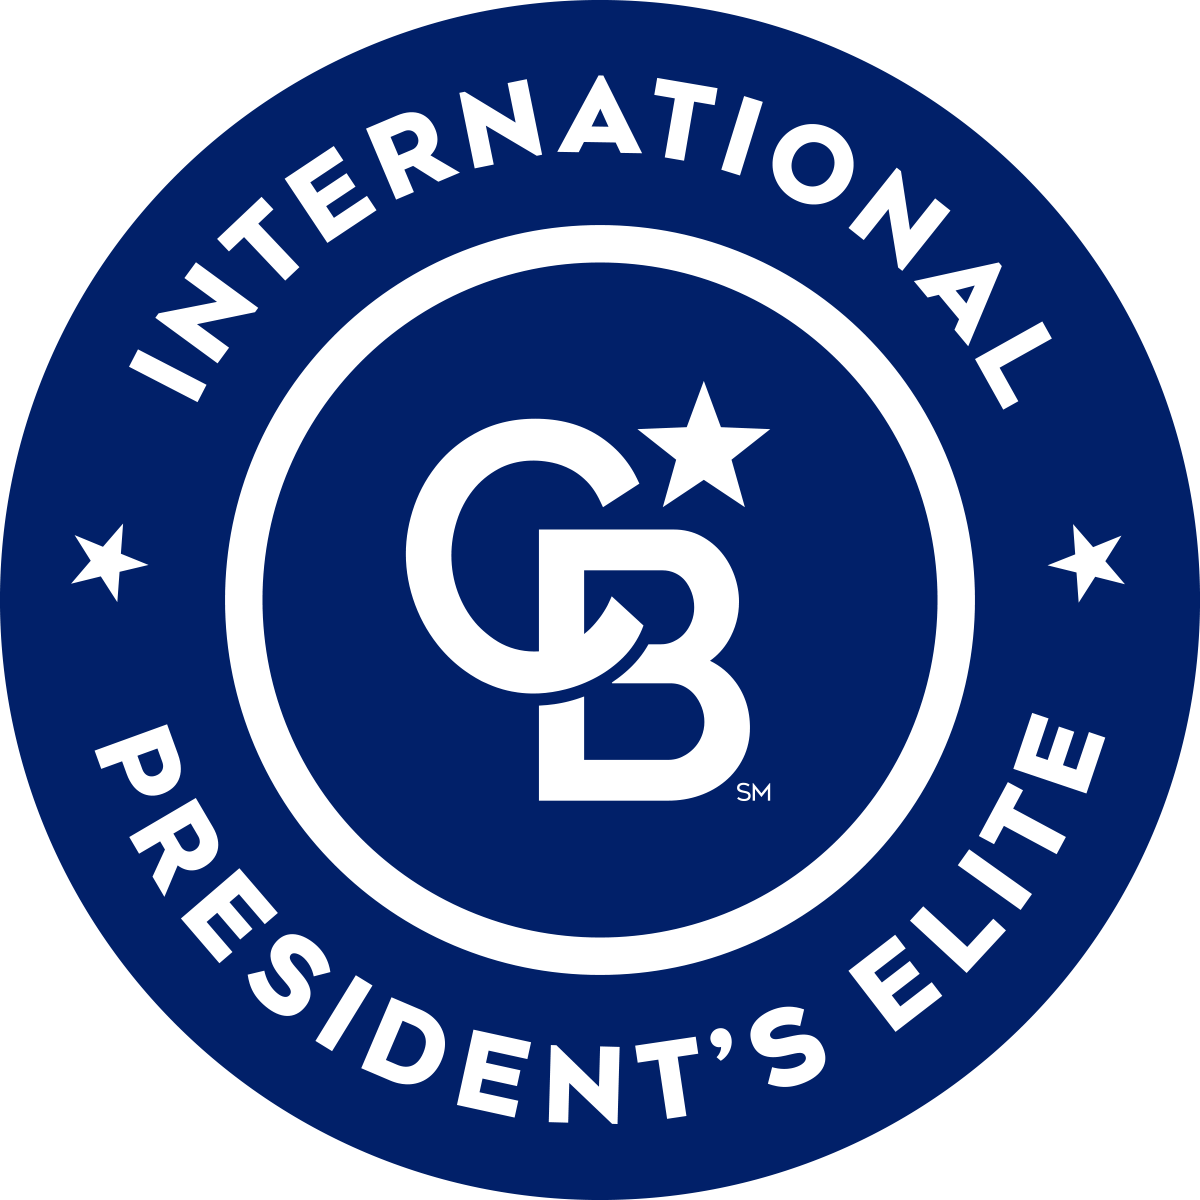 Top 3% of Coldwell Banker® Agents Worldwide